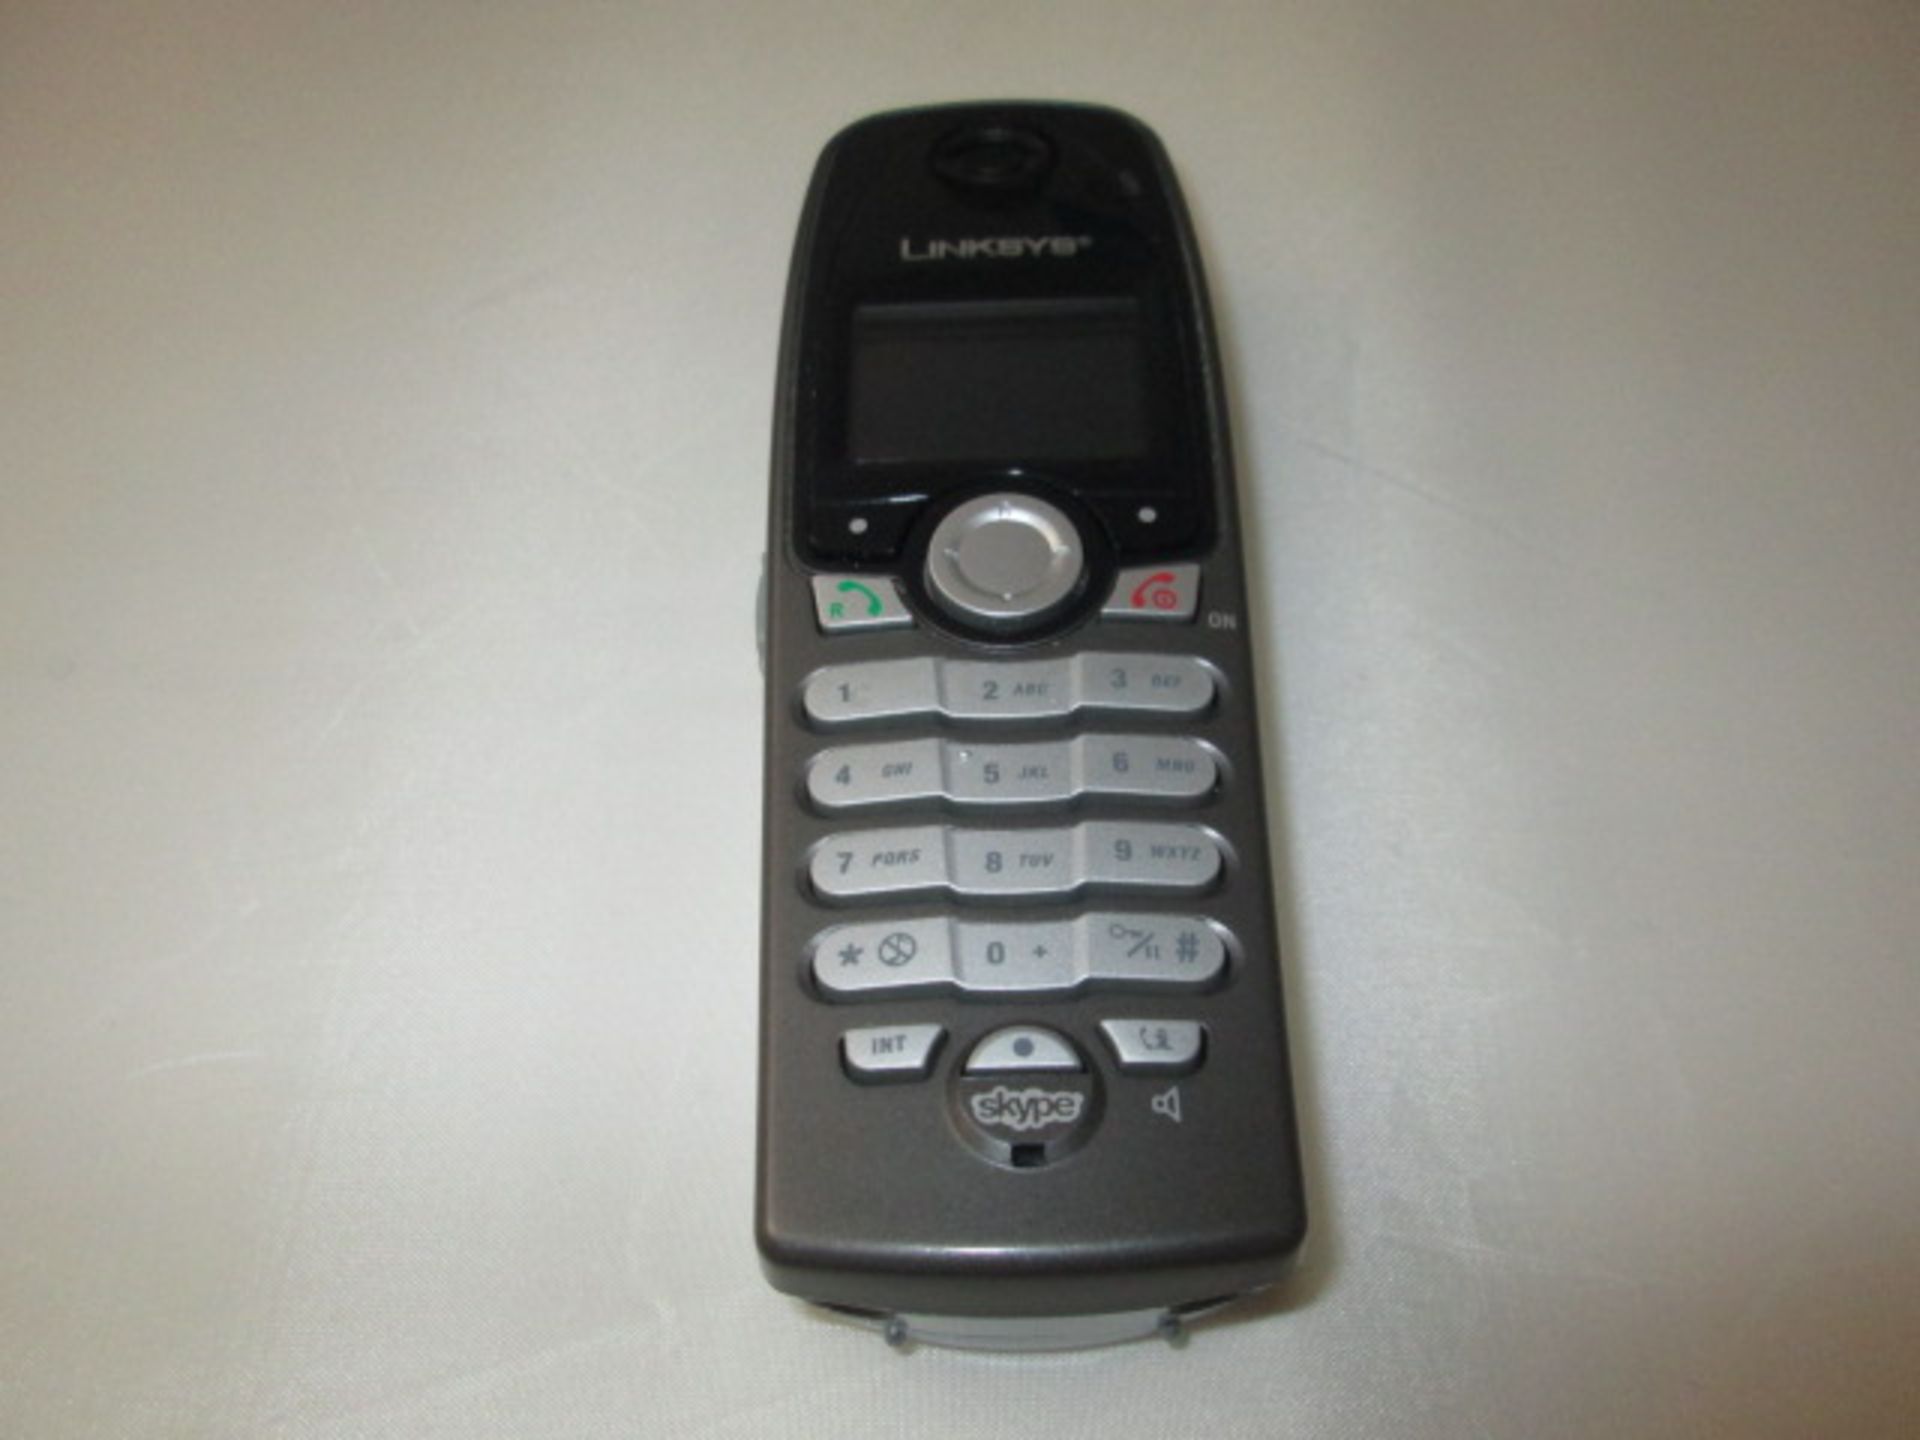 Linksys Cordless Dual Mode Internet Telephony Kit, Model CIT300. Complete with Handset, Charger with - Image 2 of 3